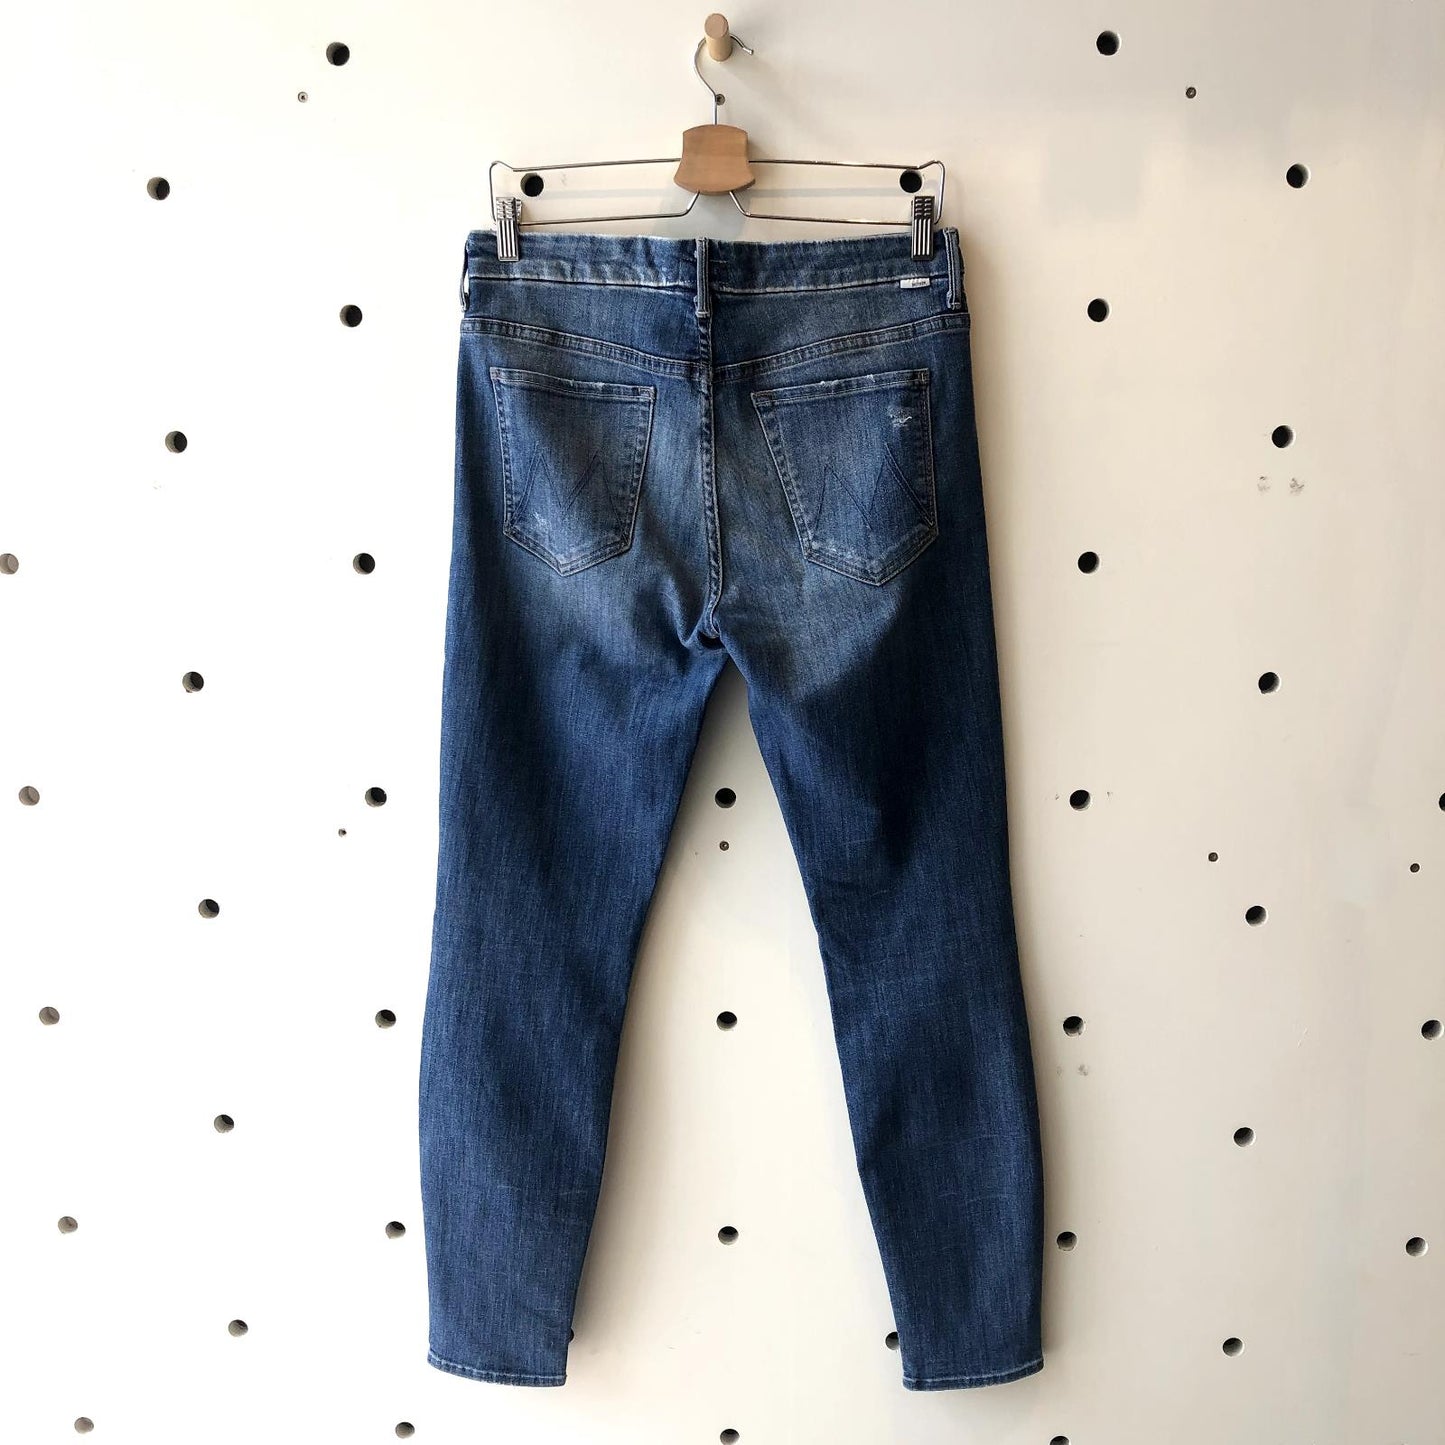 30 - Mother High Waisted Looker in High Five Wash Distressed Jeans 0206BS